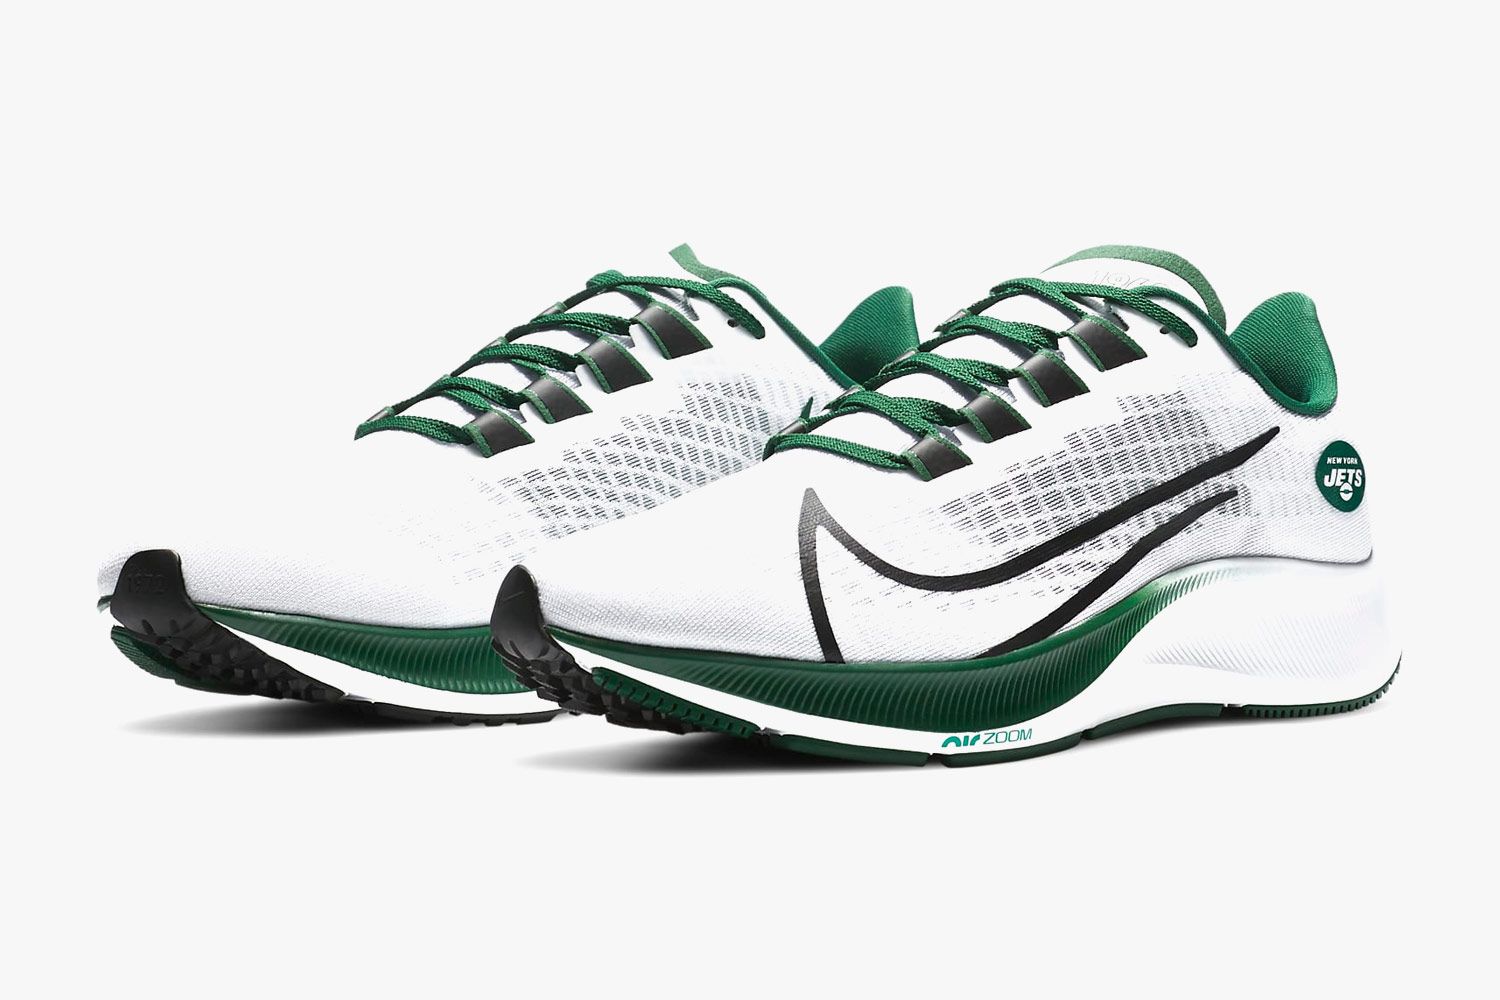 Litoral Decoración arena Nike Pegasus 37s Are Crazy Cheap, but There's a Hilarious Catch